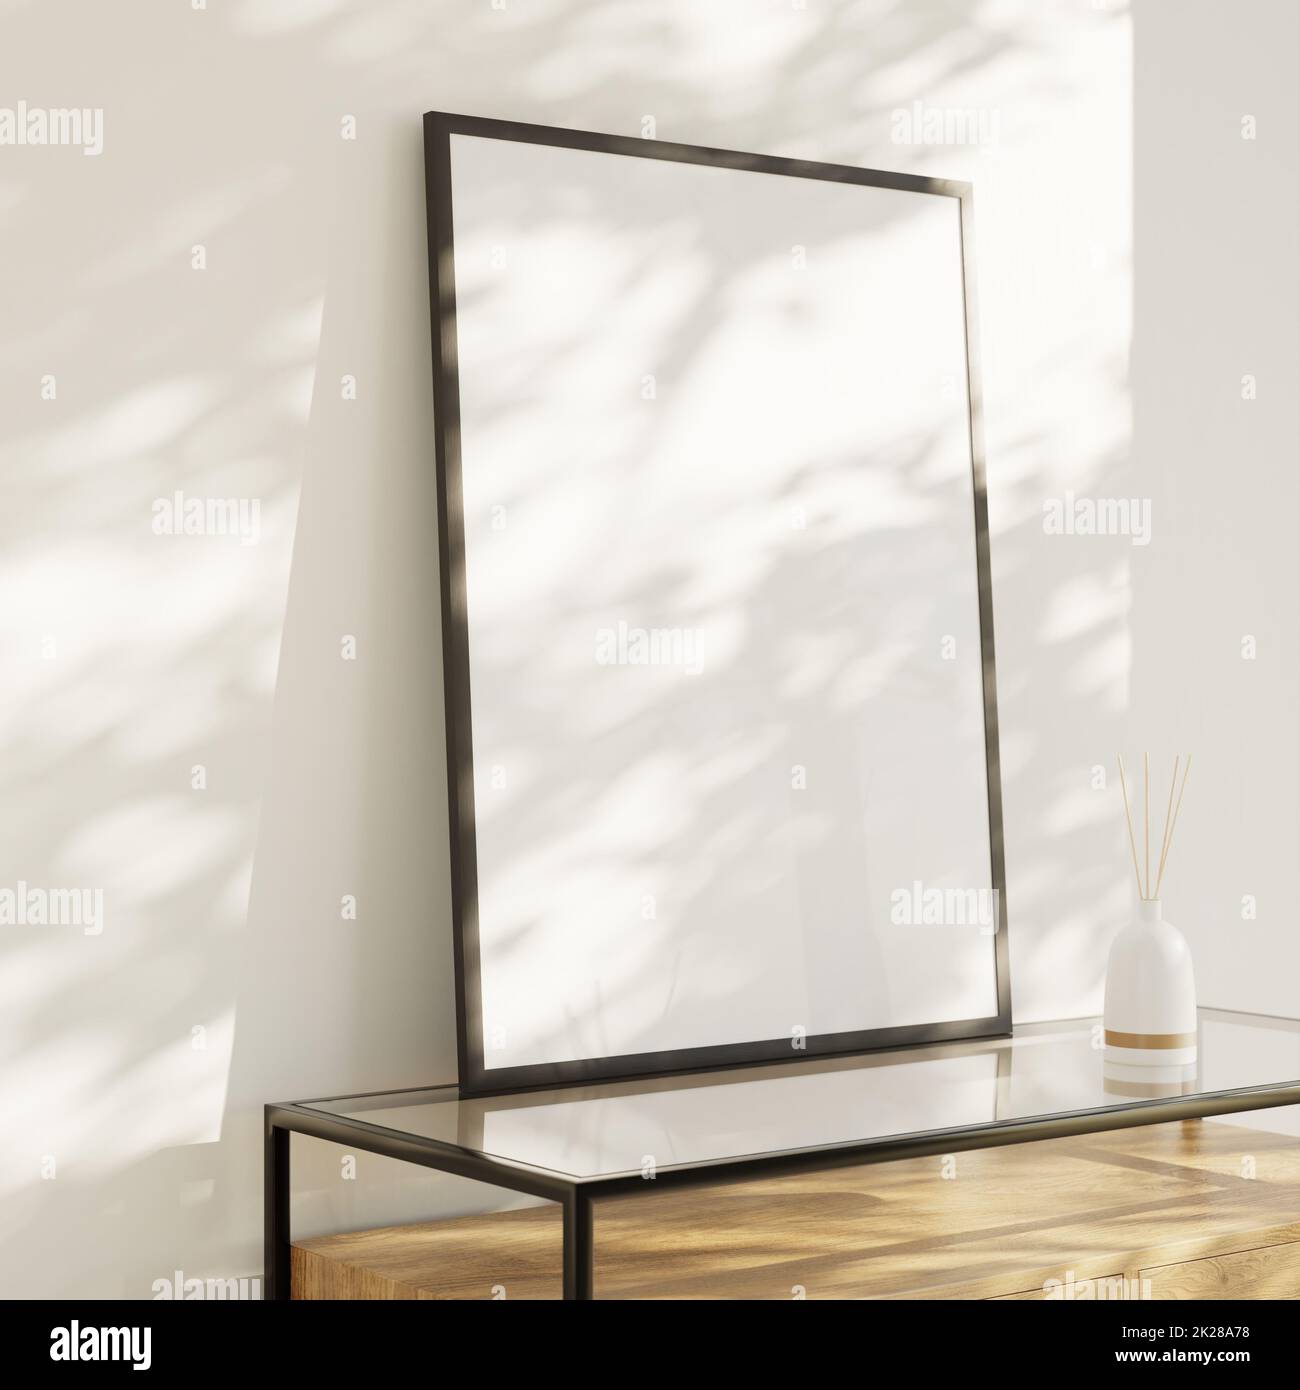 Interior mockup - Living room with a blank picture frame on a sideboard leaning against the wall. Luminous pattern light effect. Porcelain vase with r Stock Photo